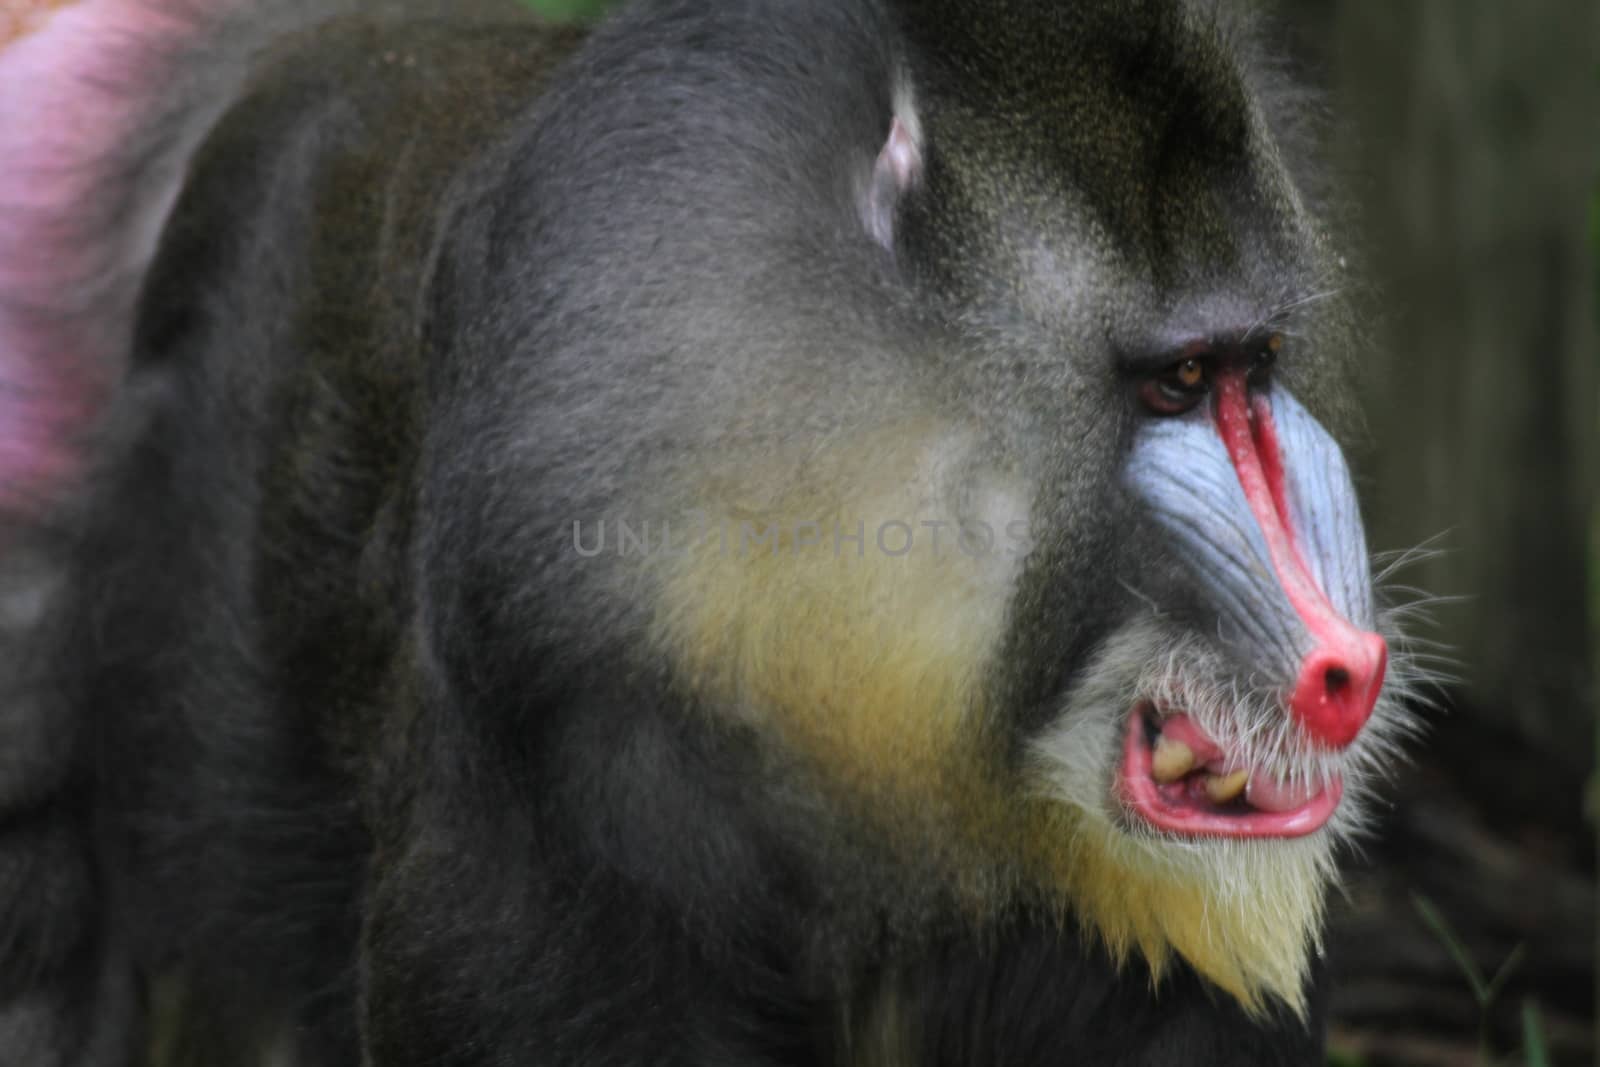 Mandrill by Kitch